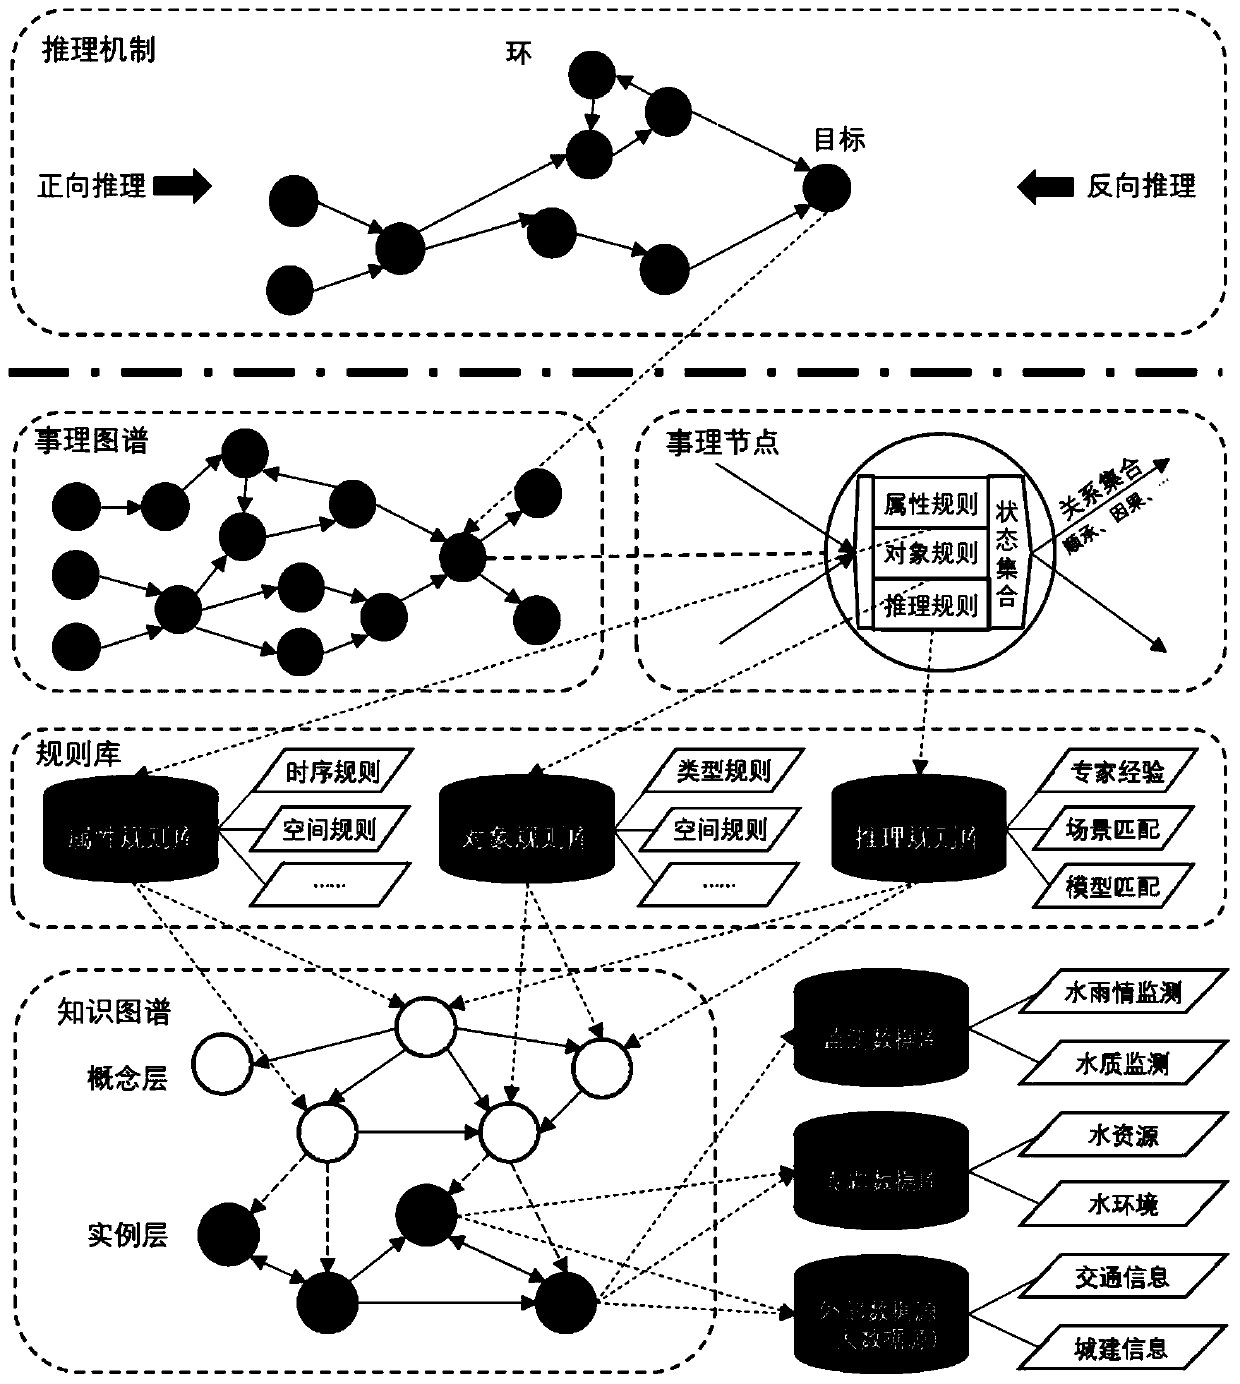 Decision support system architecture and method based on water conservancy knowledge-fact coupling network